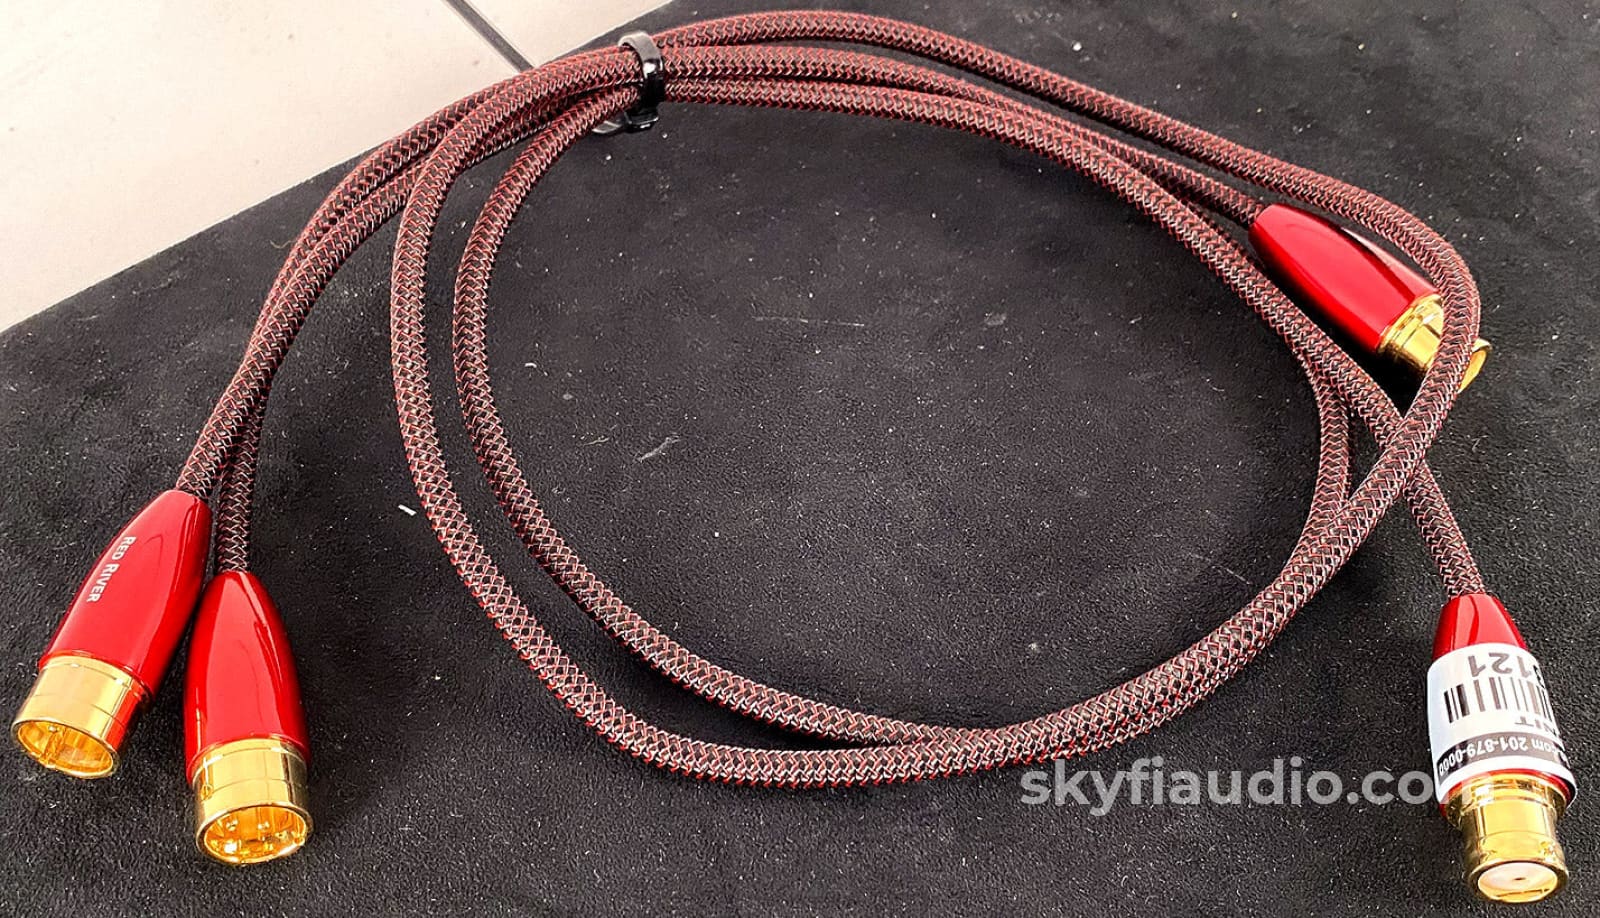 Audioquest Red River Series Xlr Audio Interconnect - 1M Cables